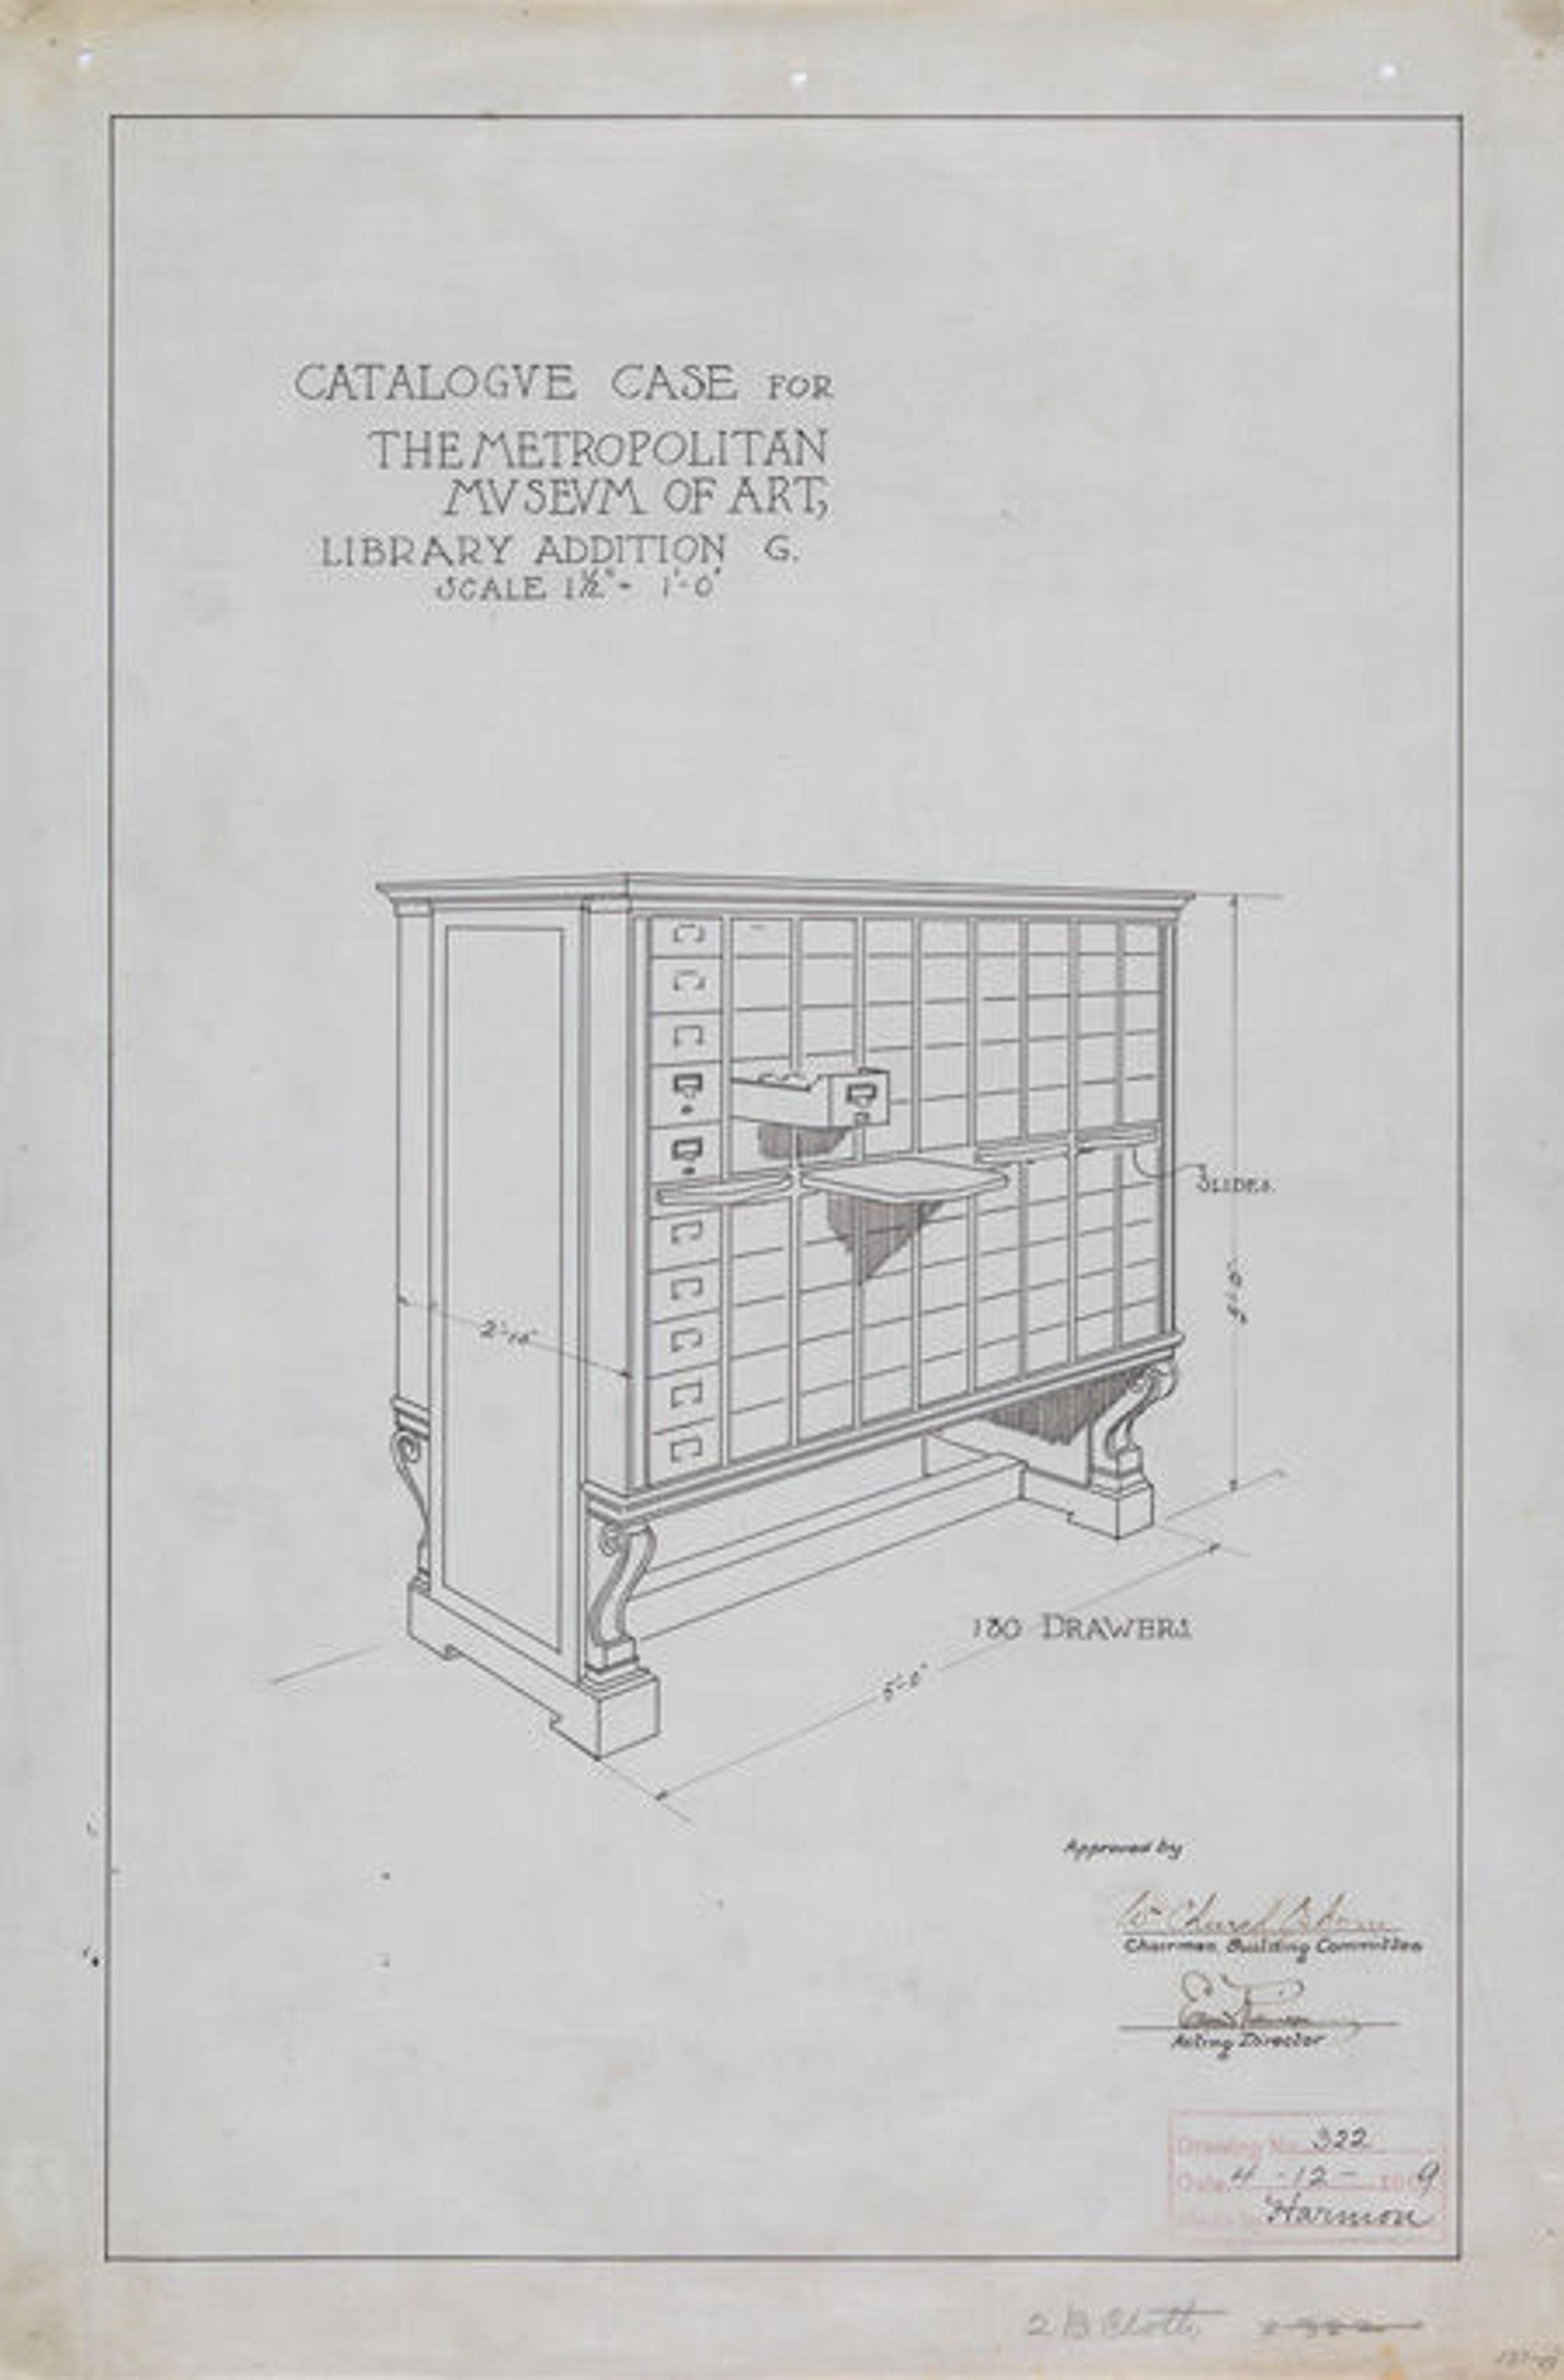 1910 design drawing for a card catalogue